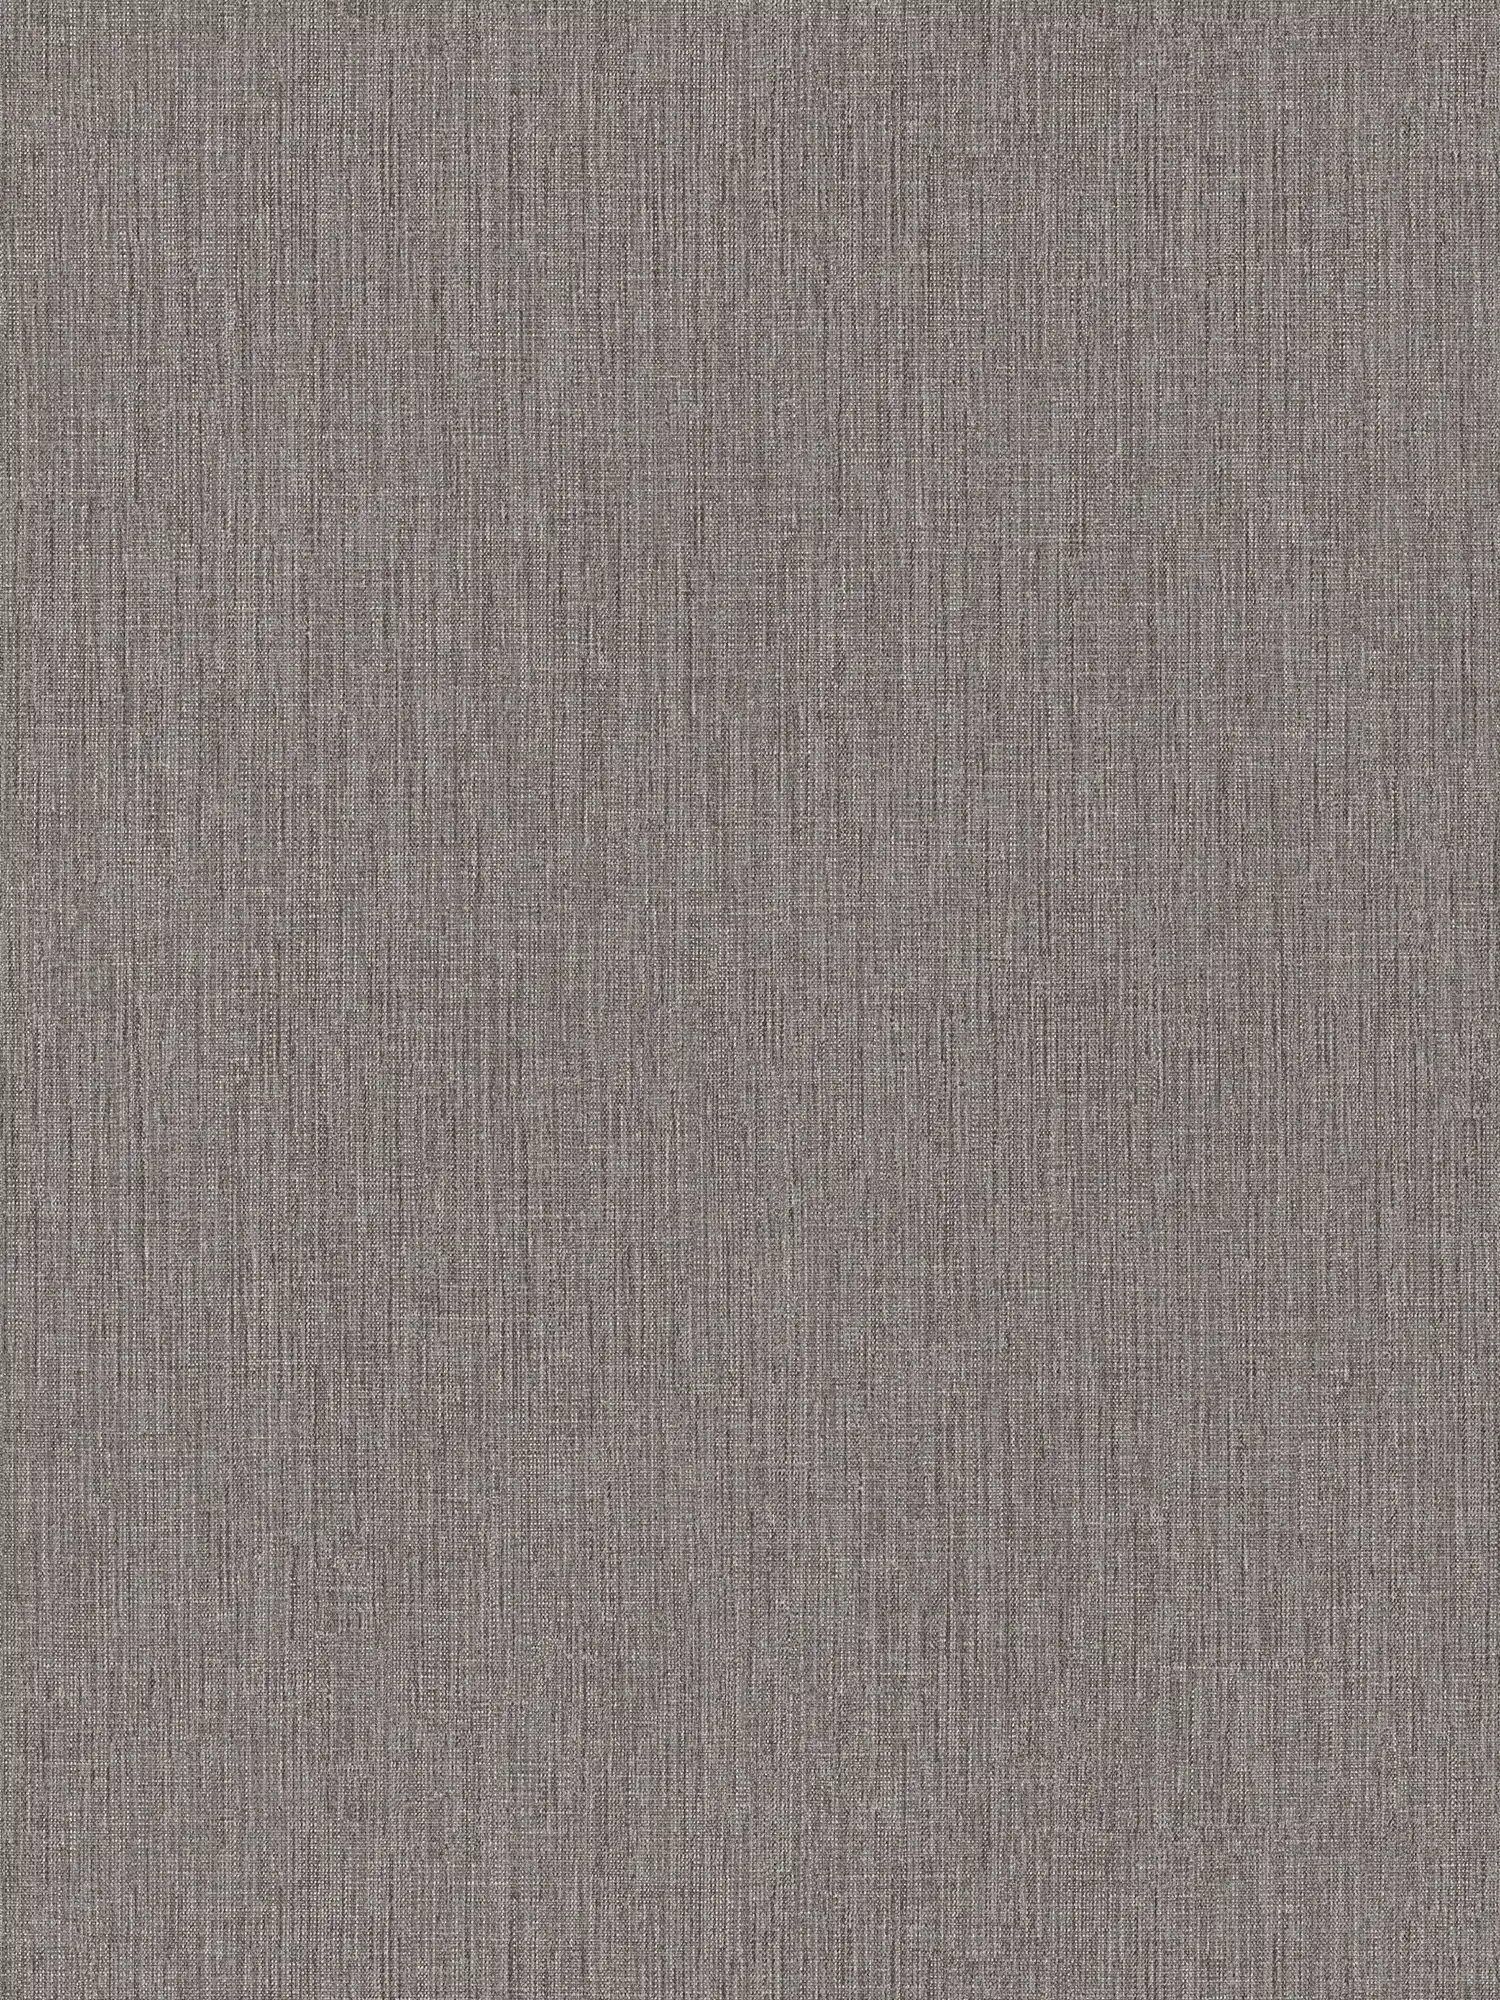 Hatched plain wallpaper with tone on tone pattern - brown
